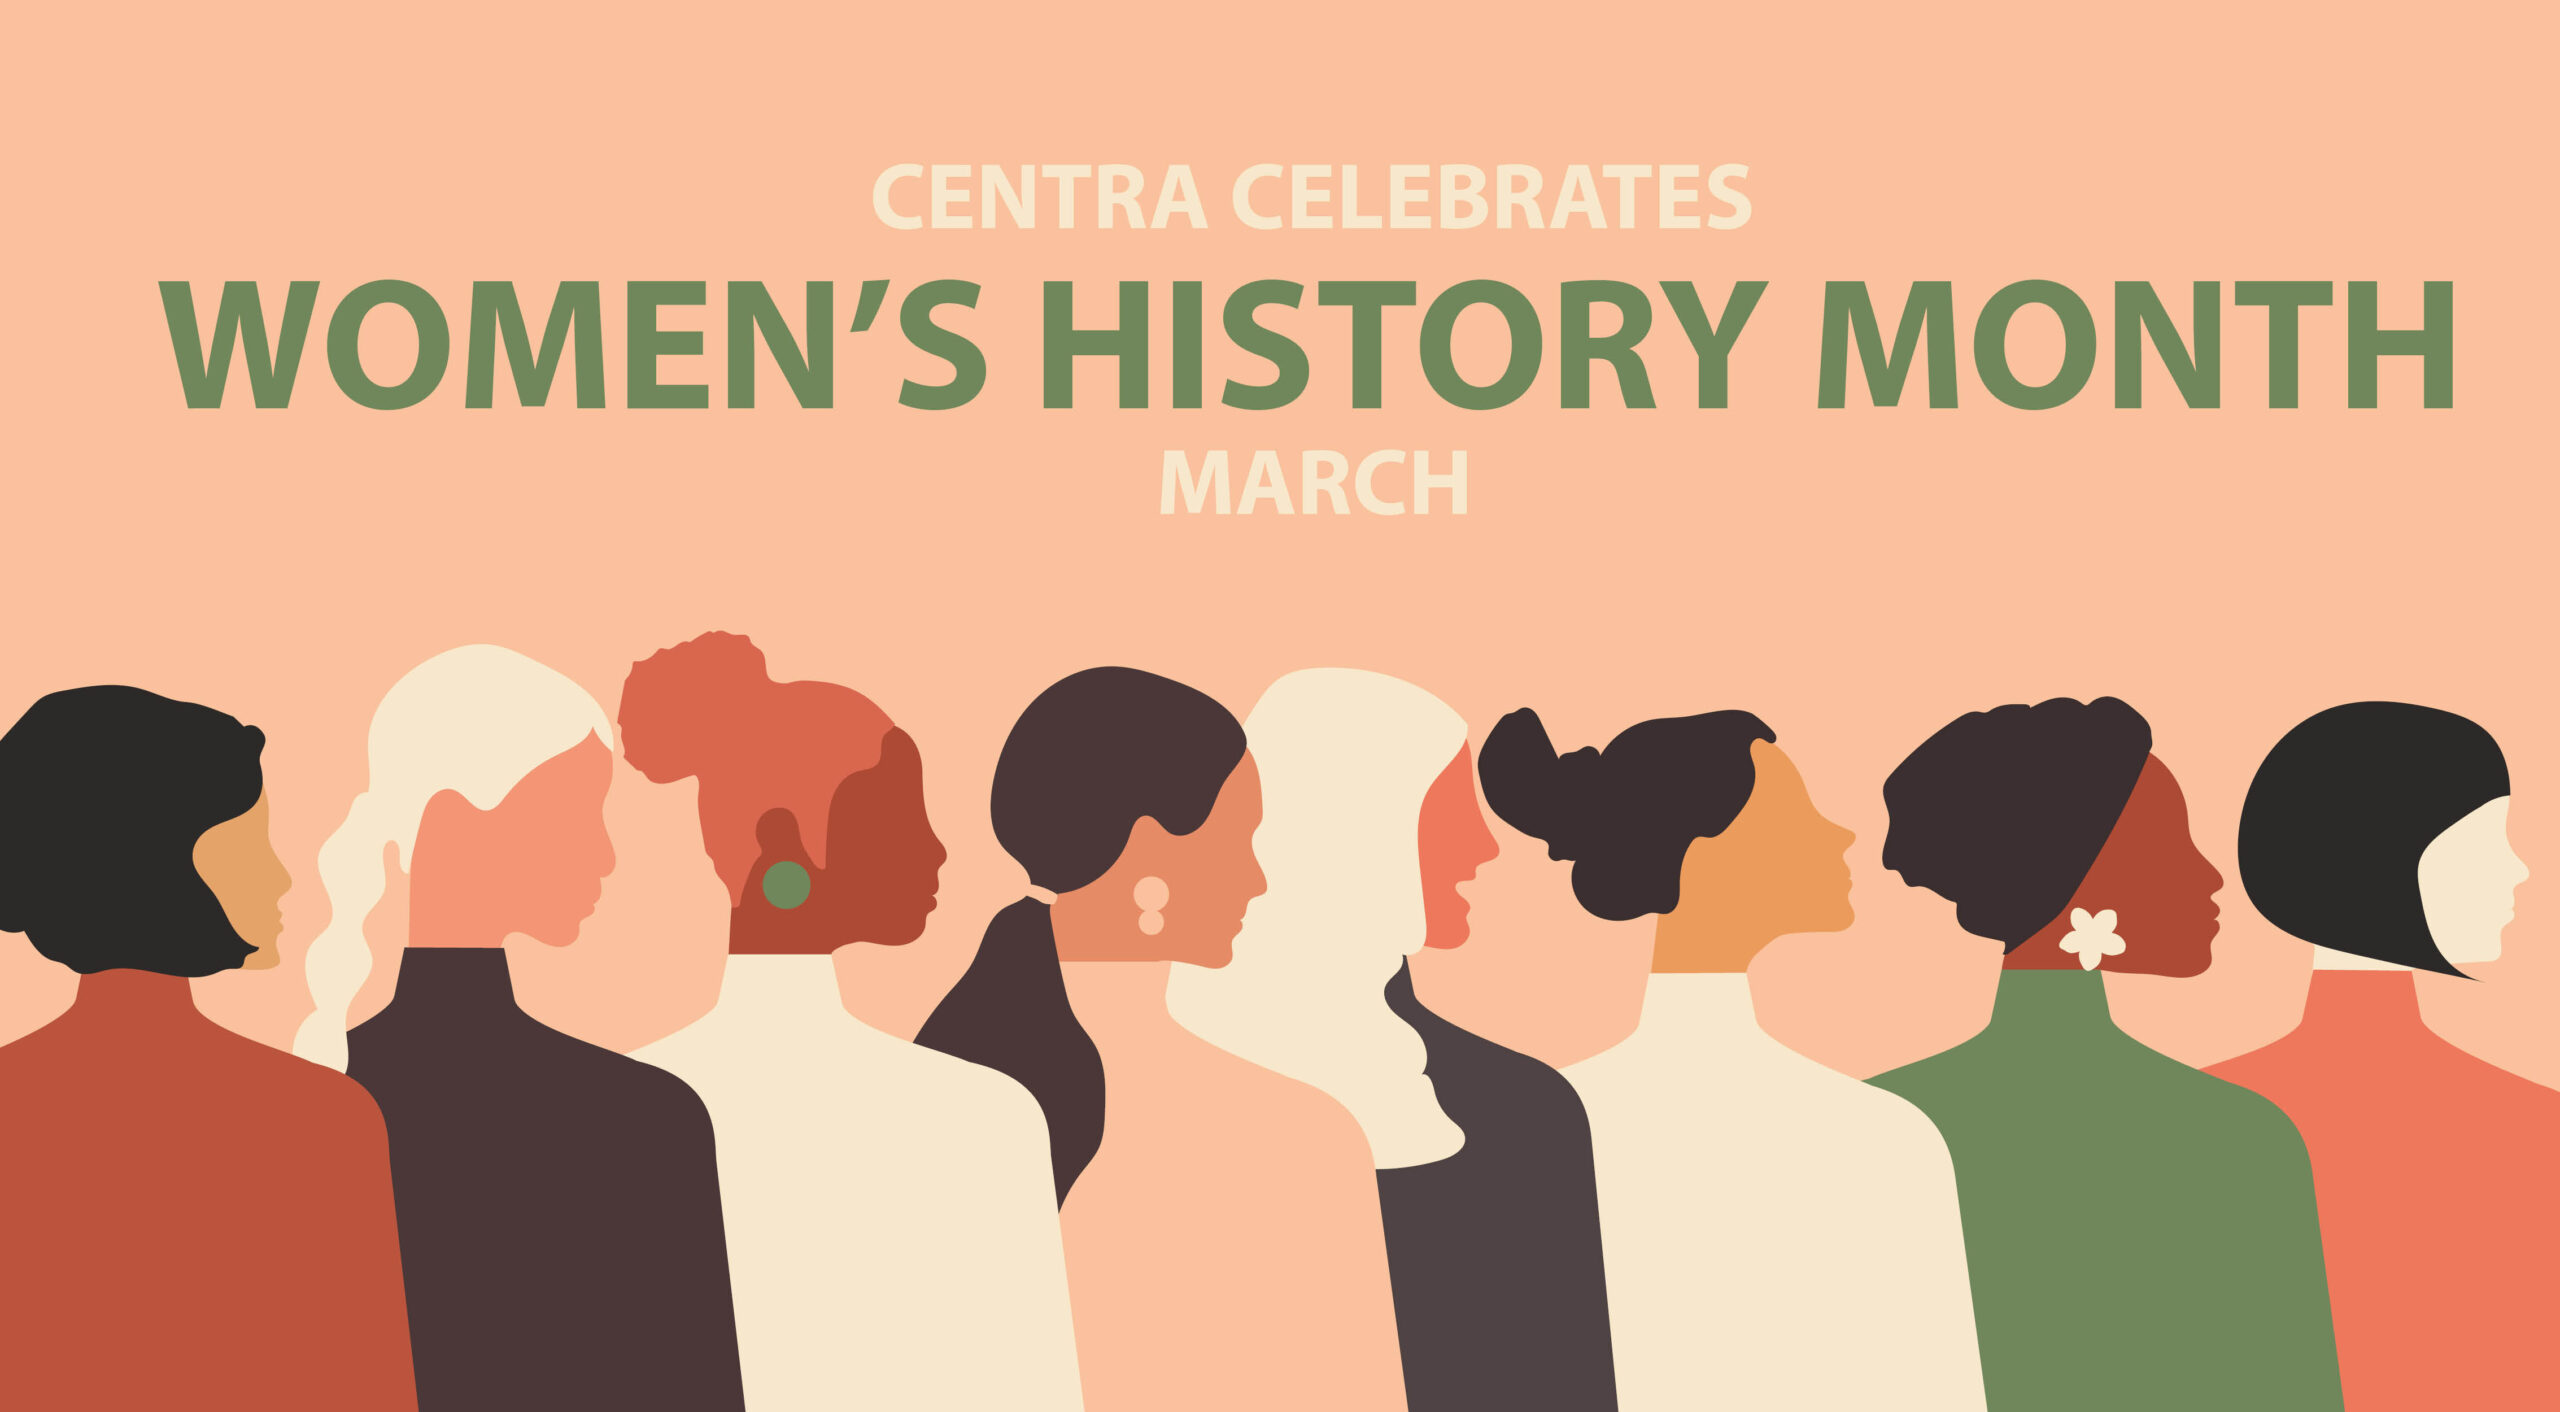 Centra celebrated Women's History Month